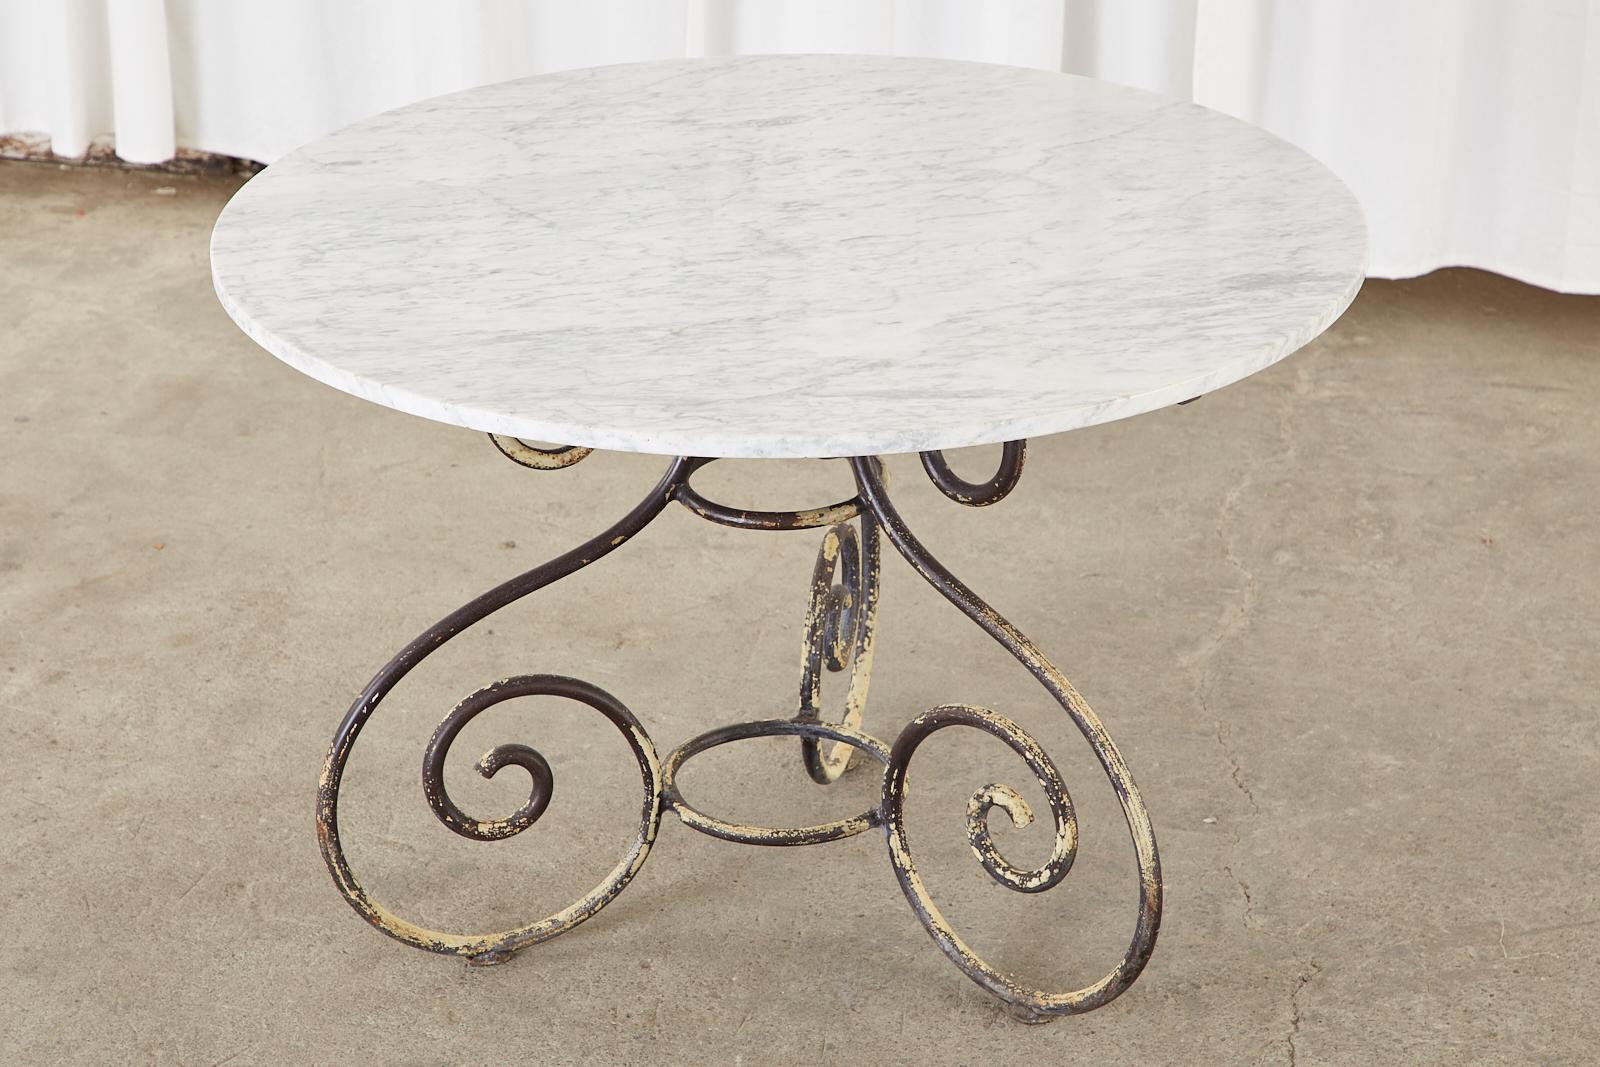 20th Century French Art Nouveau Carrrara Marble Iron Garden Dining Table For Sale